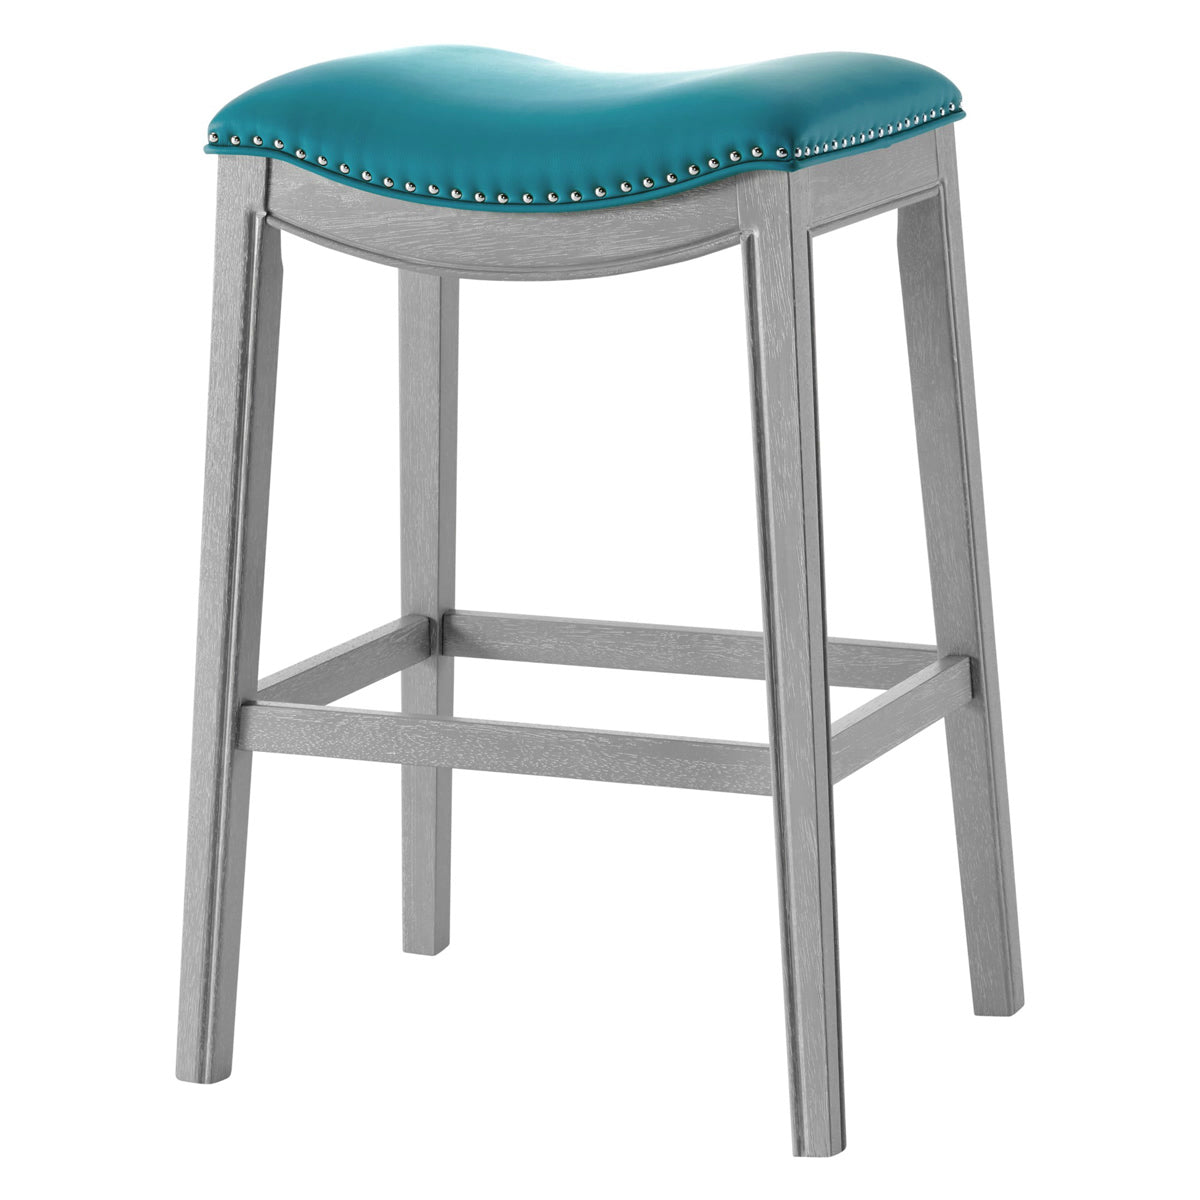 Grover PU Leather Bar Stool by New Pacific Direct - 1330003-388